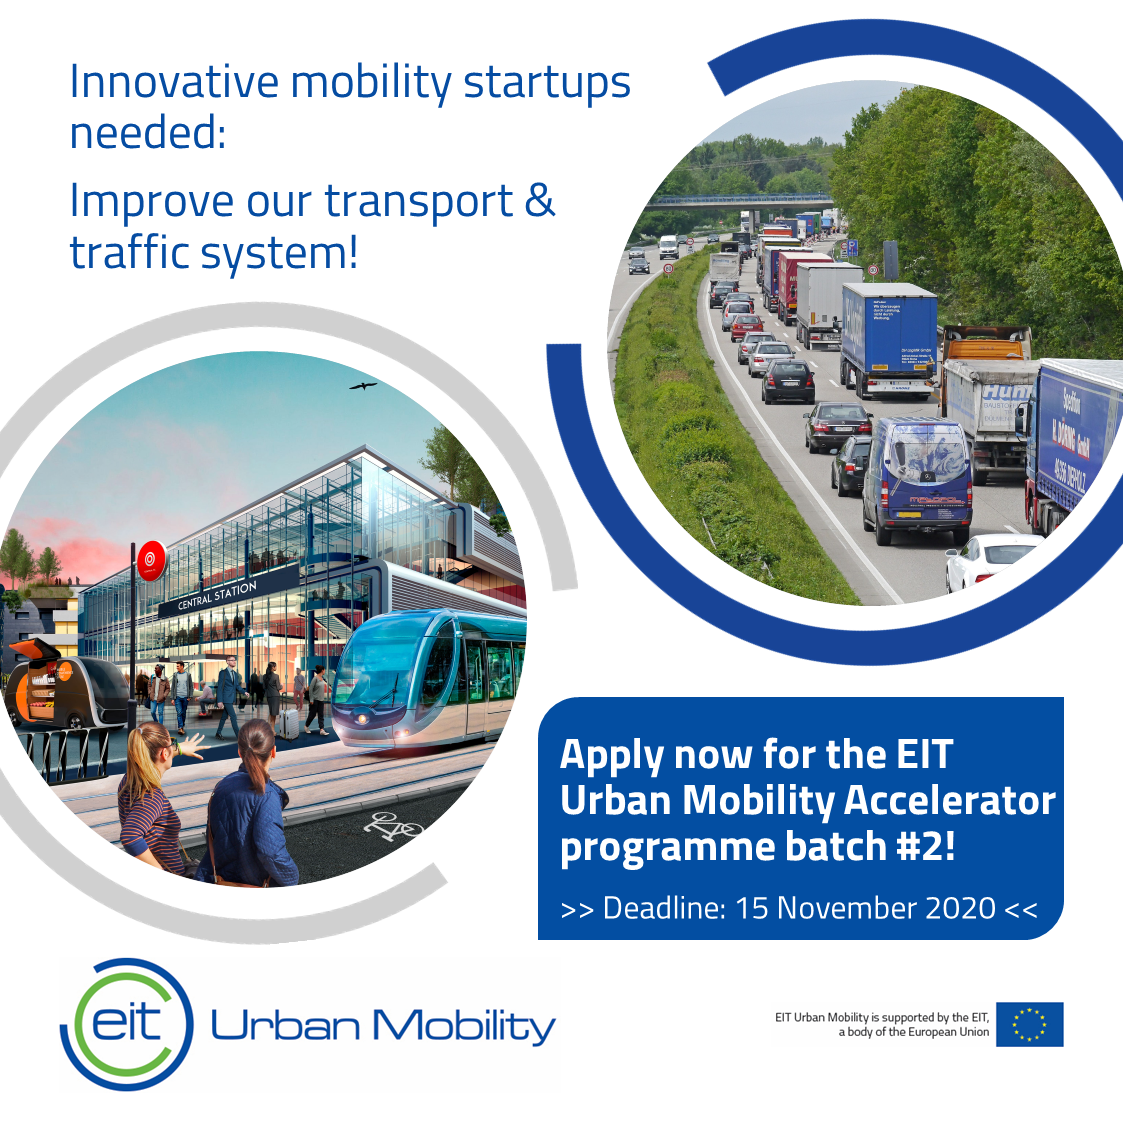 Innovative mobility startups needed; Improve our transport & traffic system! Apply now for the EIT Urban Mobility Accelerator programme batch #2! EIT Urban Mobility